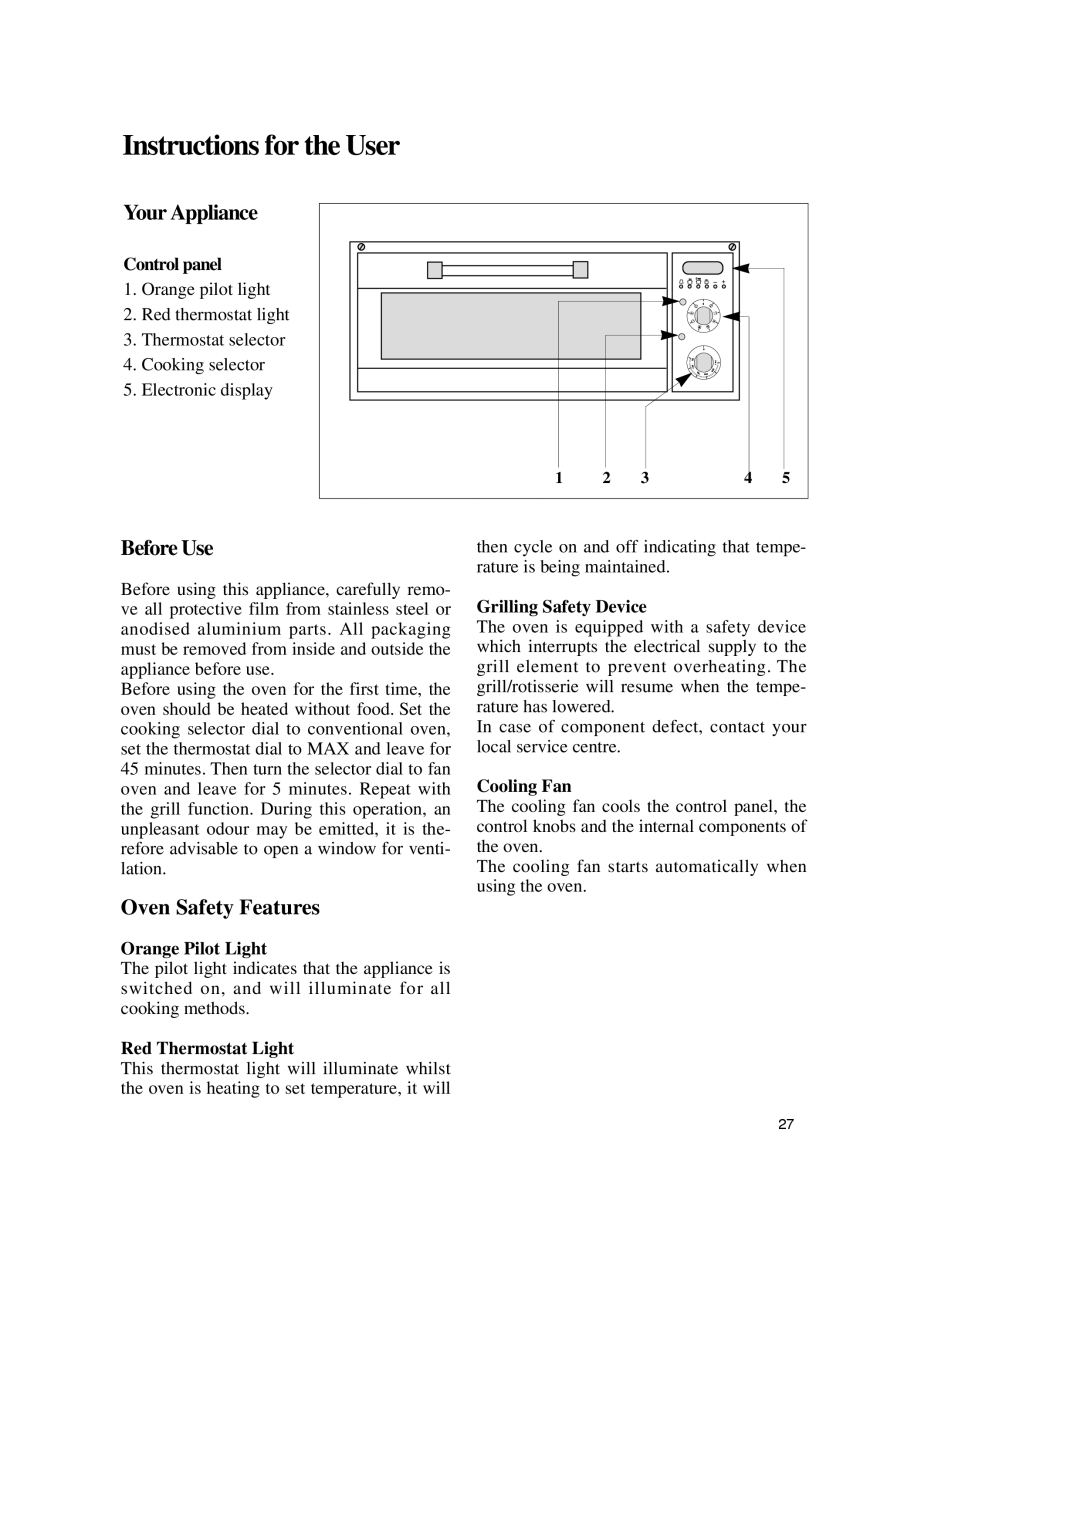 Zanussi ZBM 799 Instructions for the User, Your Appliance, Before Use, Oven Safety Features, Control panel, Cooling Fan 